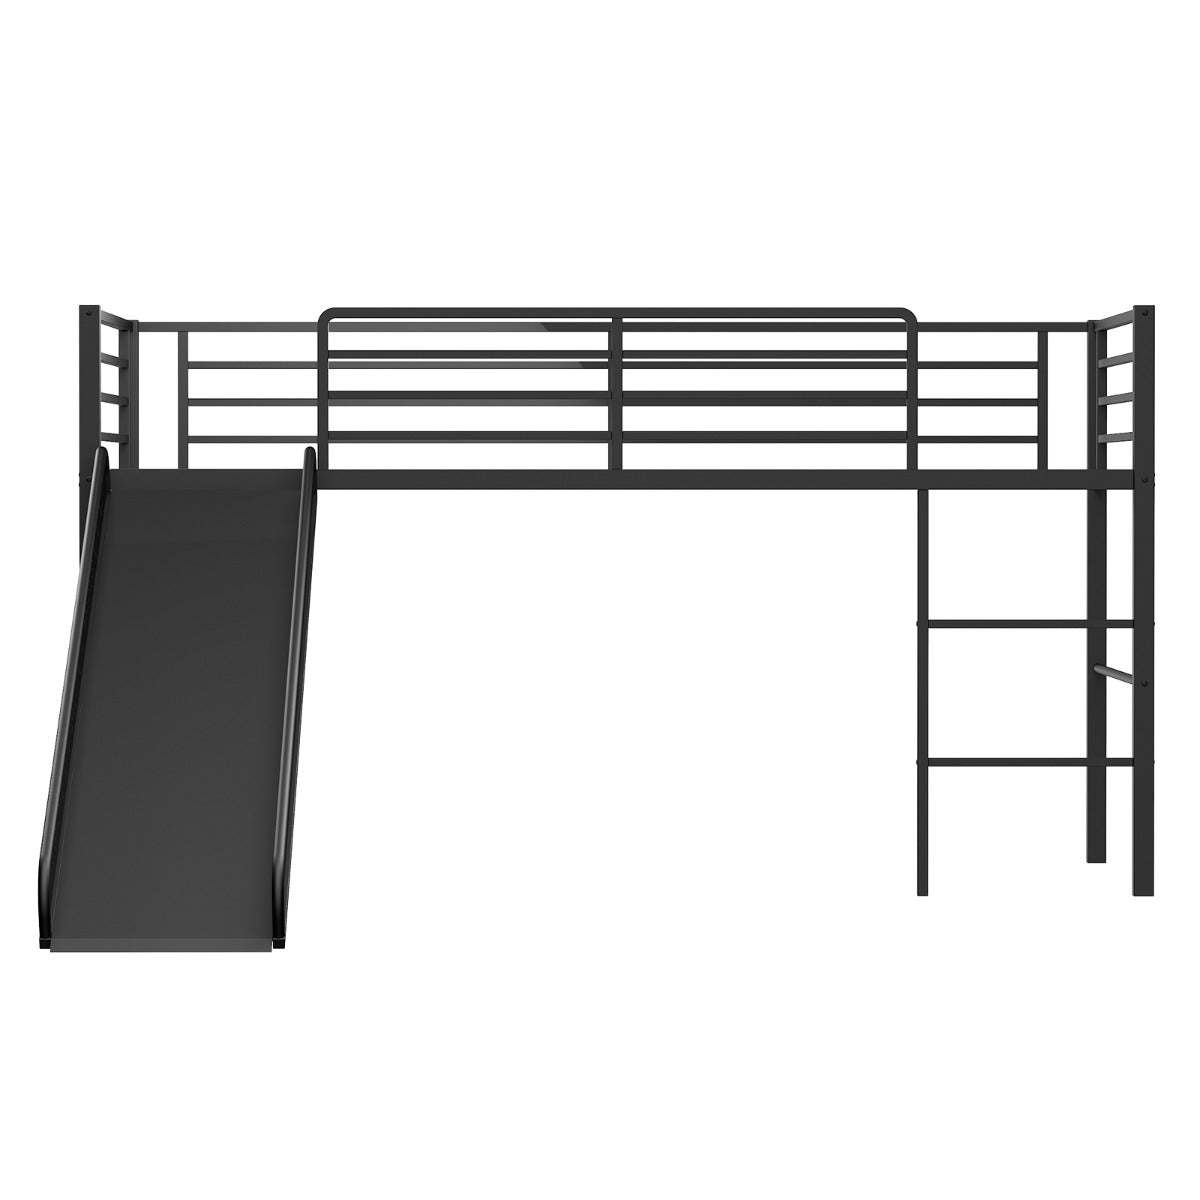 Adventure Awaits with Our Loft Bed Slide